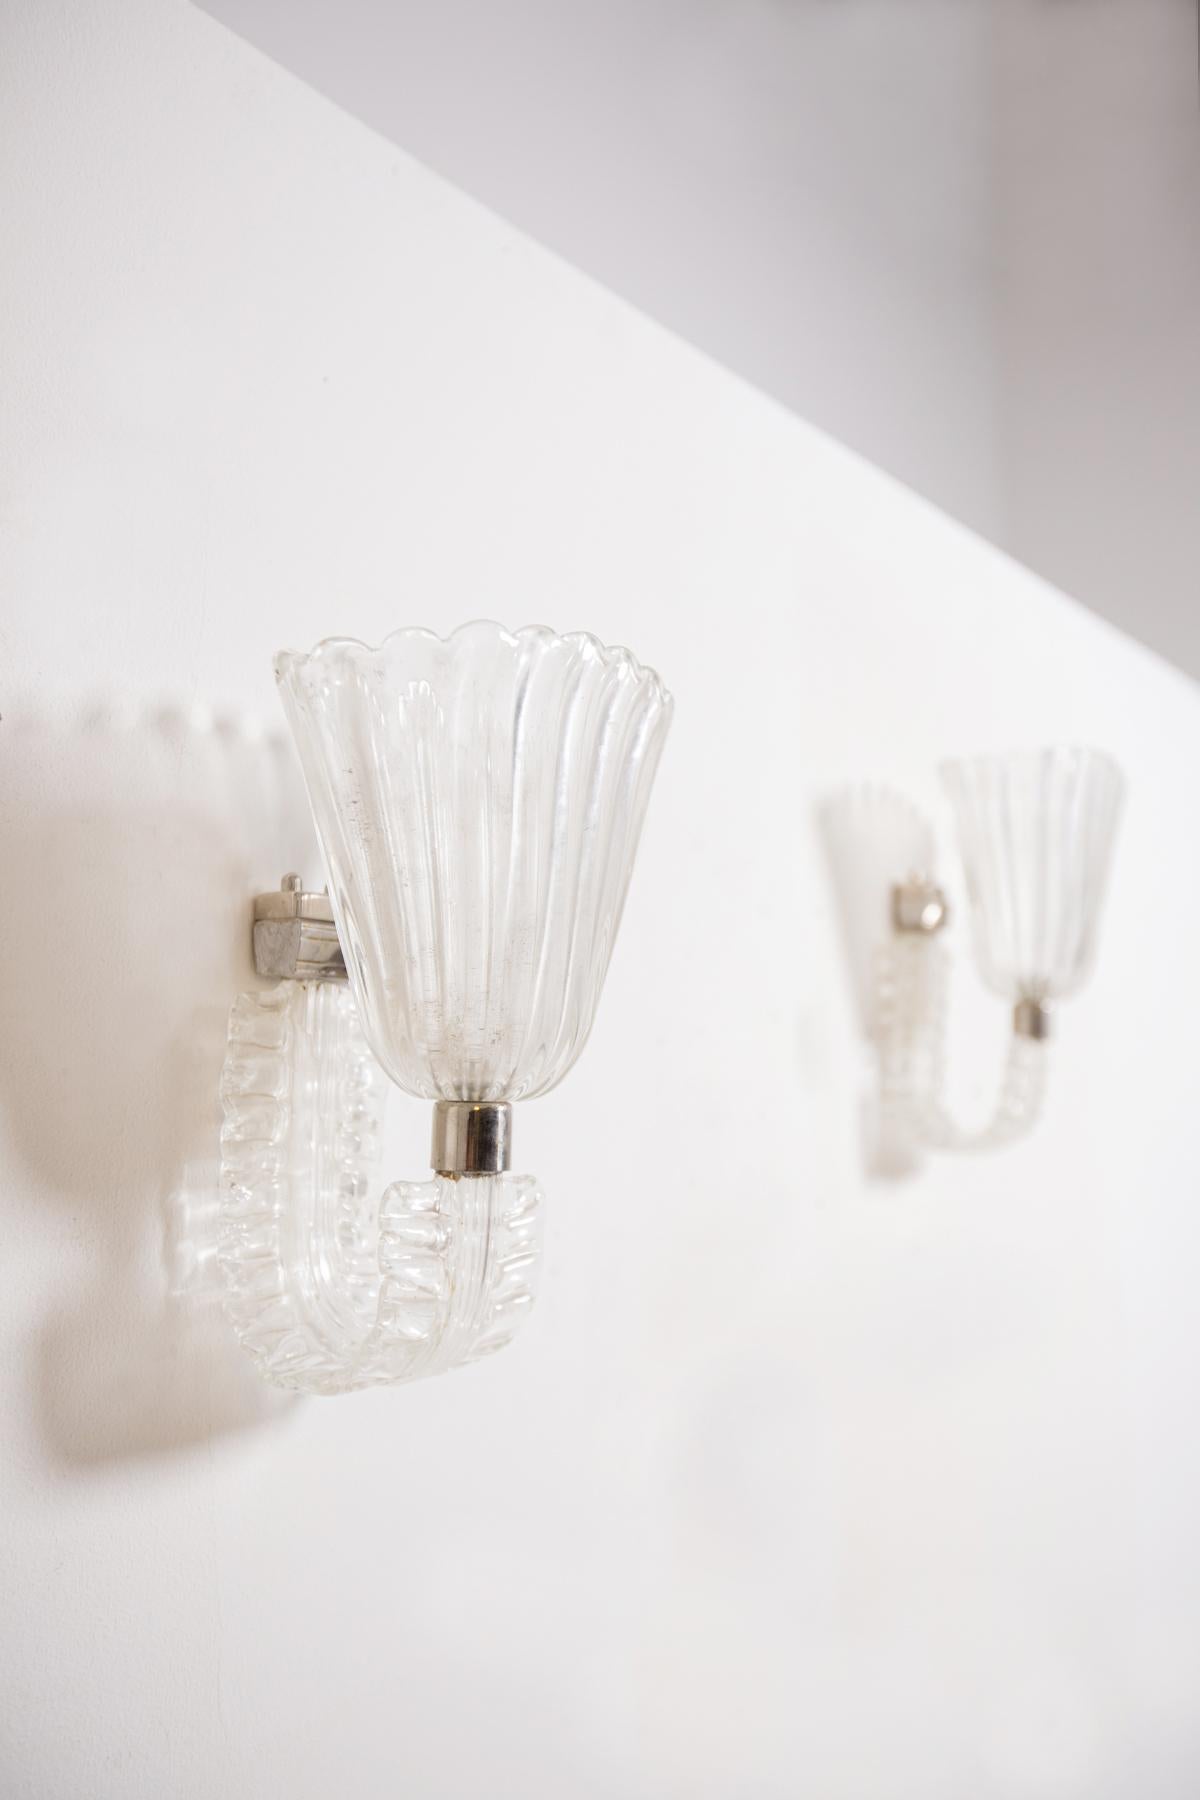 Elegant pair of wall lamps by Barovier & Toso in Murano glass. The pair of wall sconces are crafted in um beautiful flower shaped Murano glass. The particularity of the wall lamps have under its glass cup a curved glass in the shape of a leaf. The